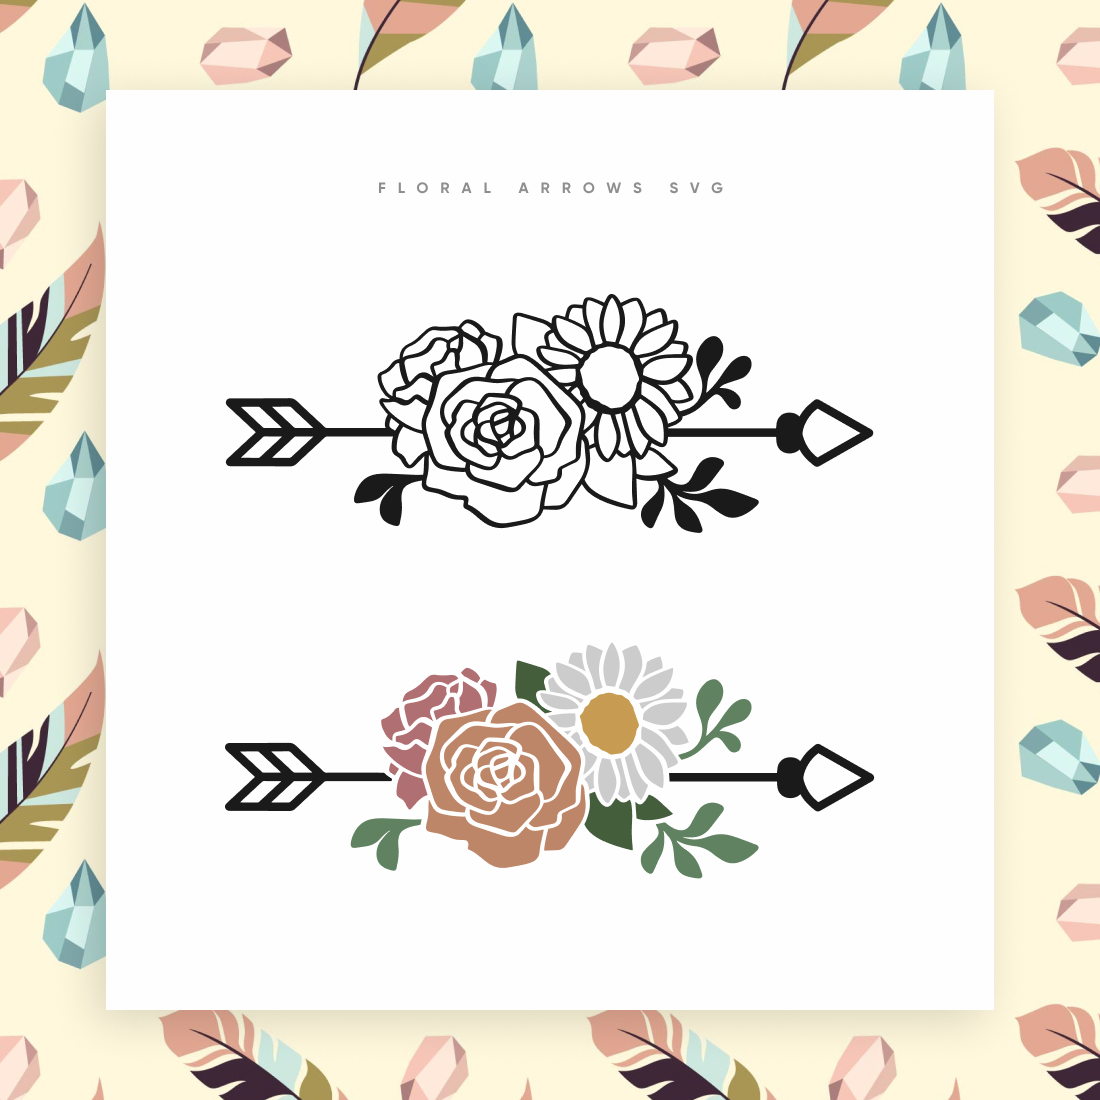 Free Floral Arrow SVG preview image.